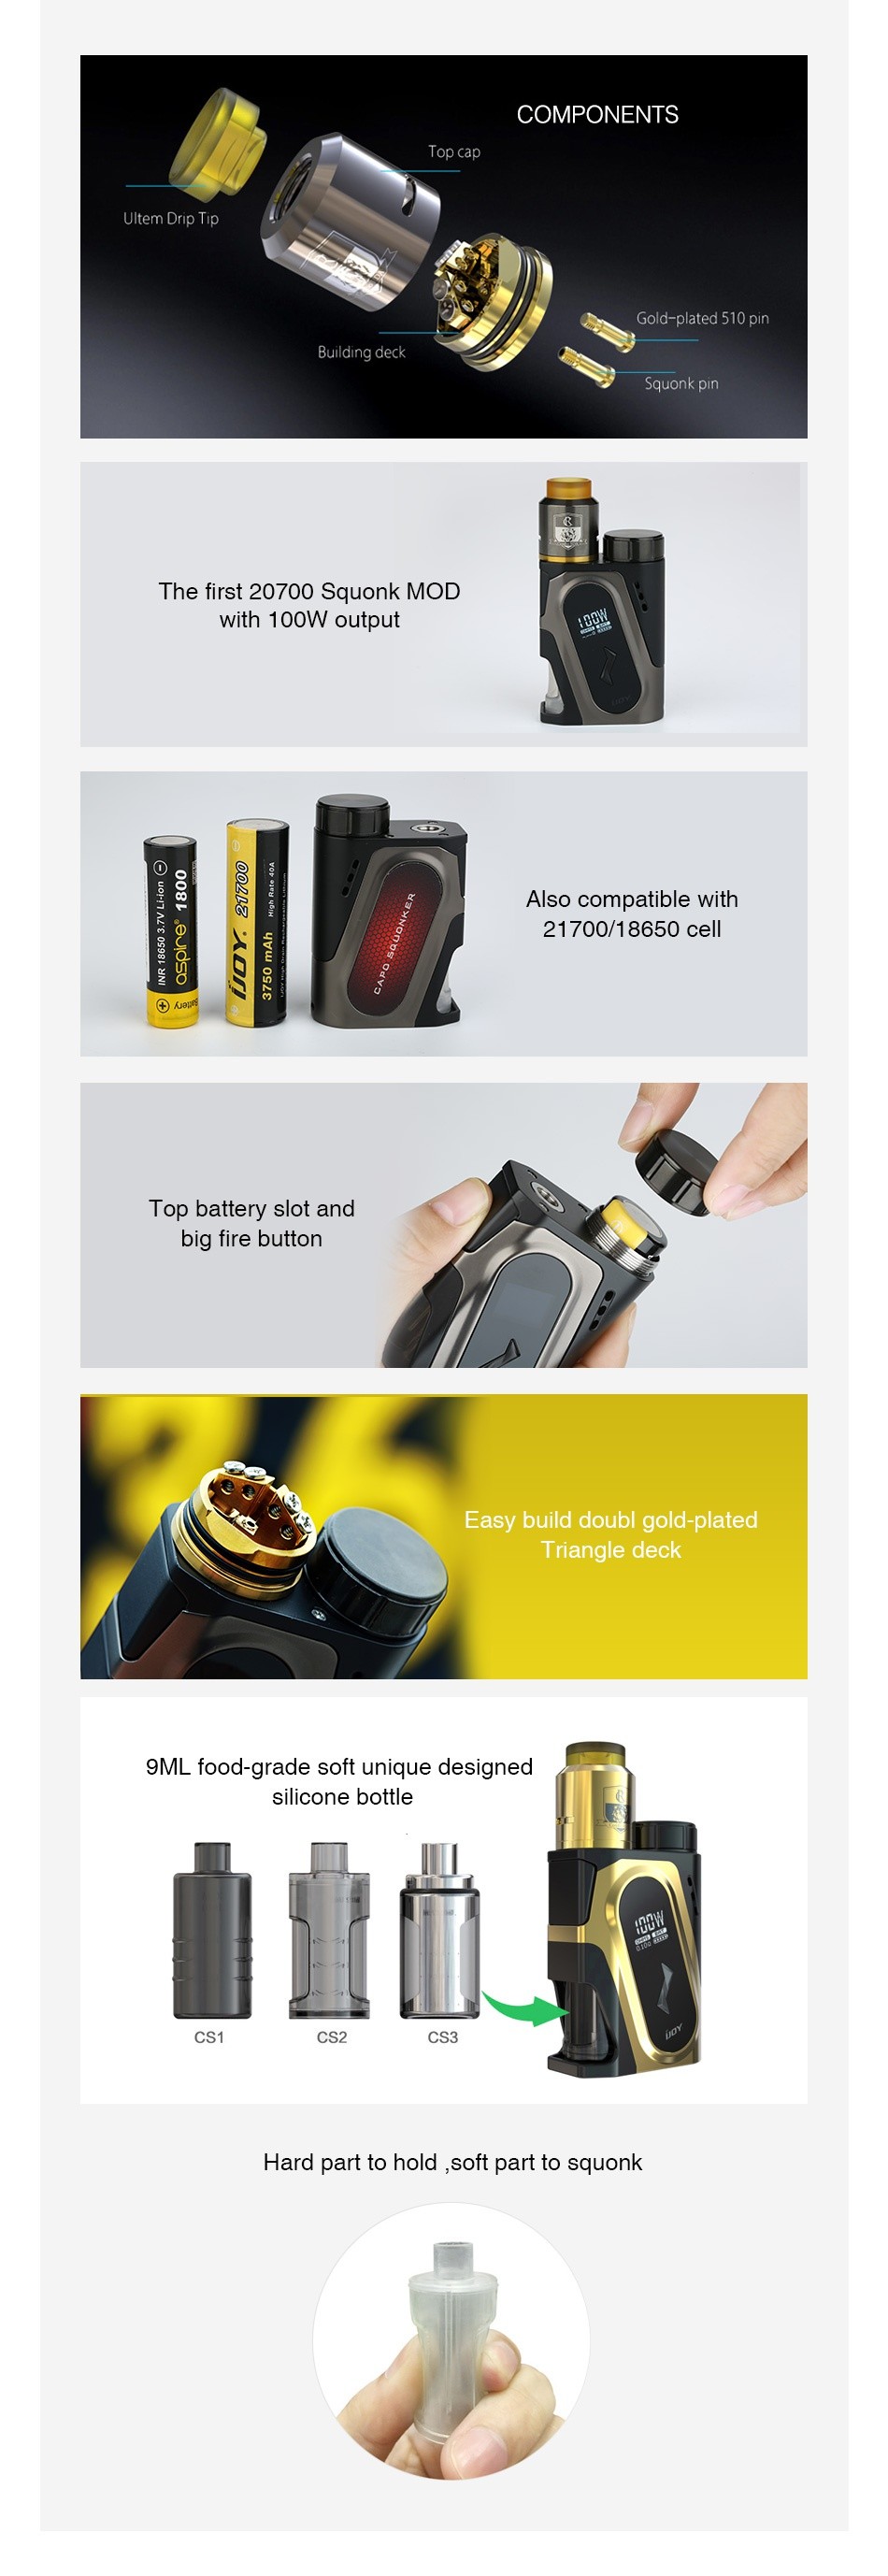 IJOY CAPO 100W 20700 Squonker Kit 3000mAh The first 20700 Squonk MOD with 100W output Q Top battery slot and big fire butto Easy build doubl gold plated Triangle deck 9ML food grade soft unique designed Hard part to hold soft part to squonk